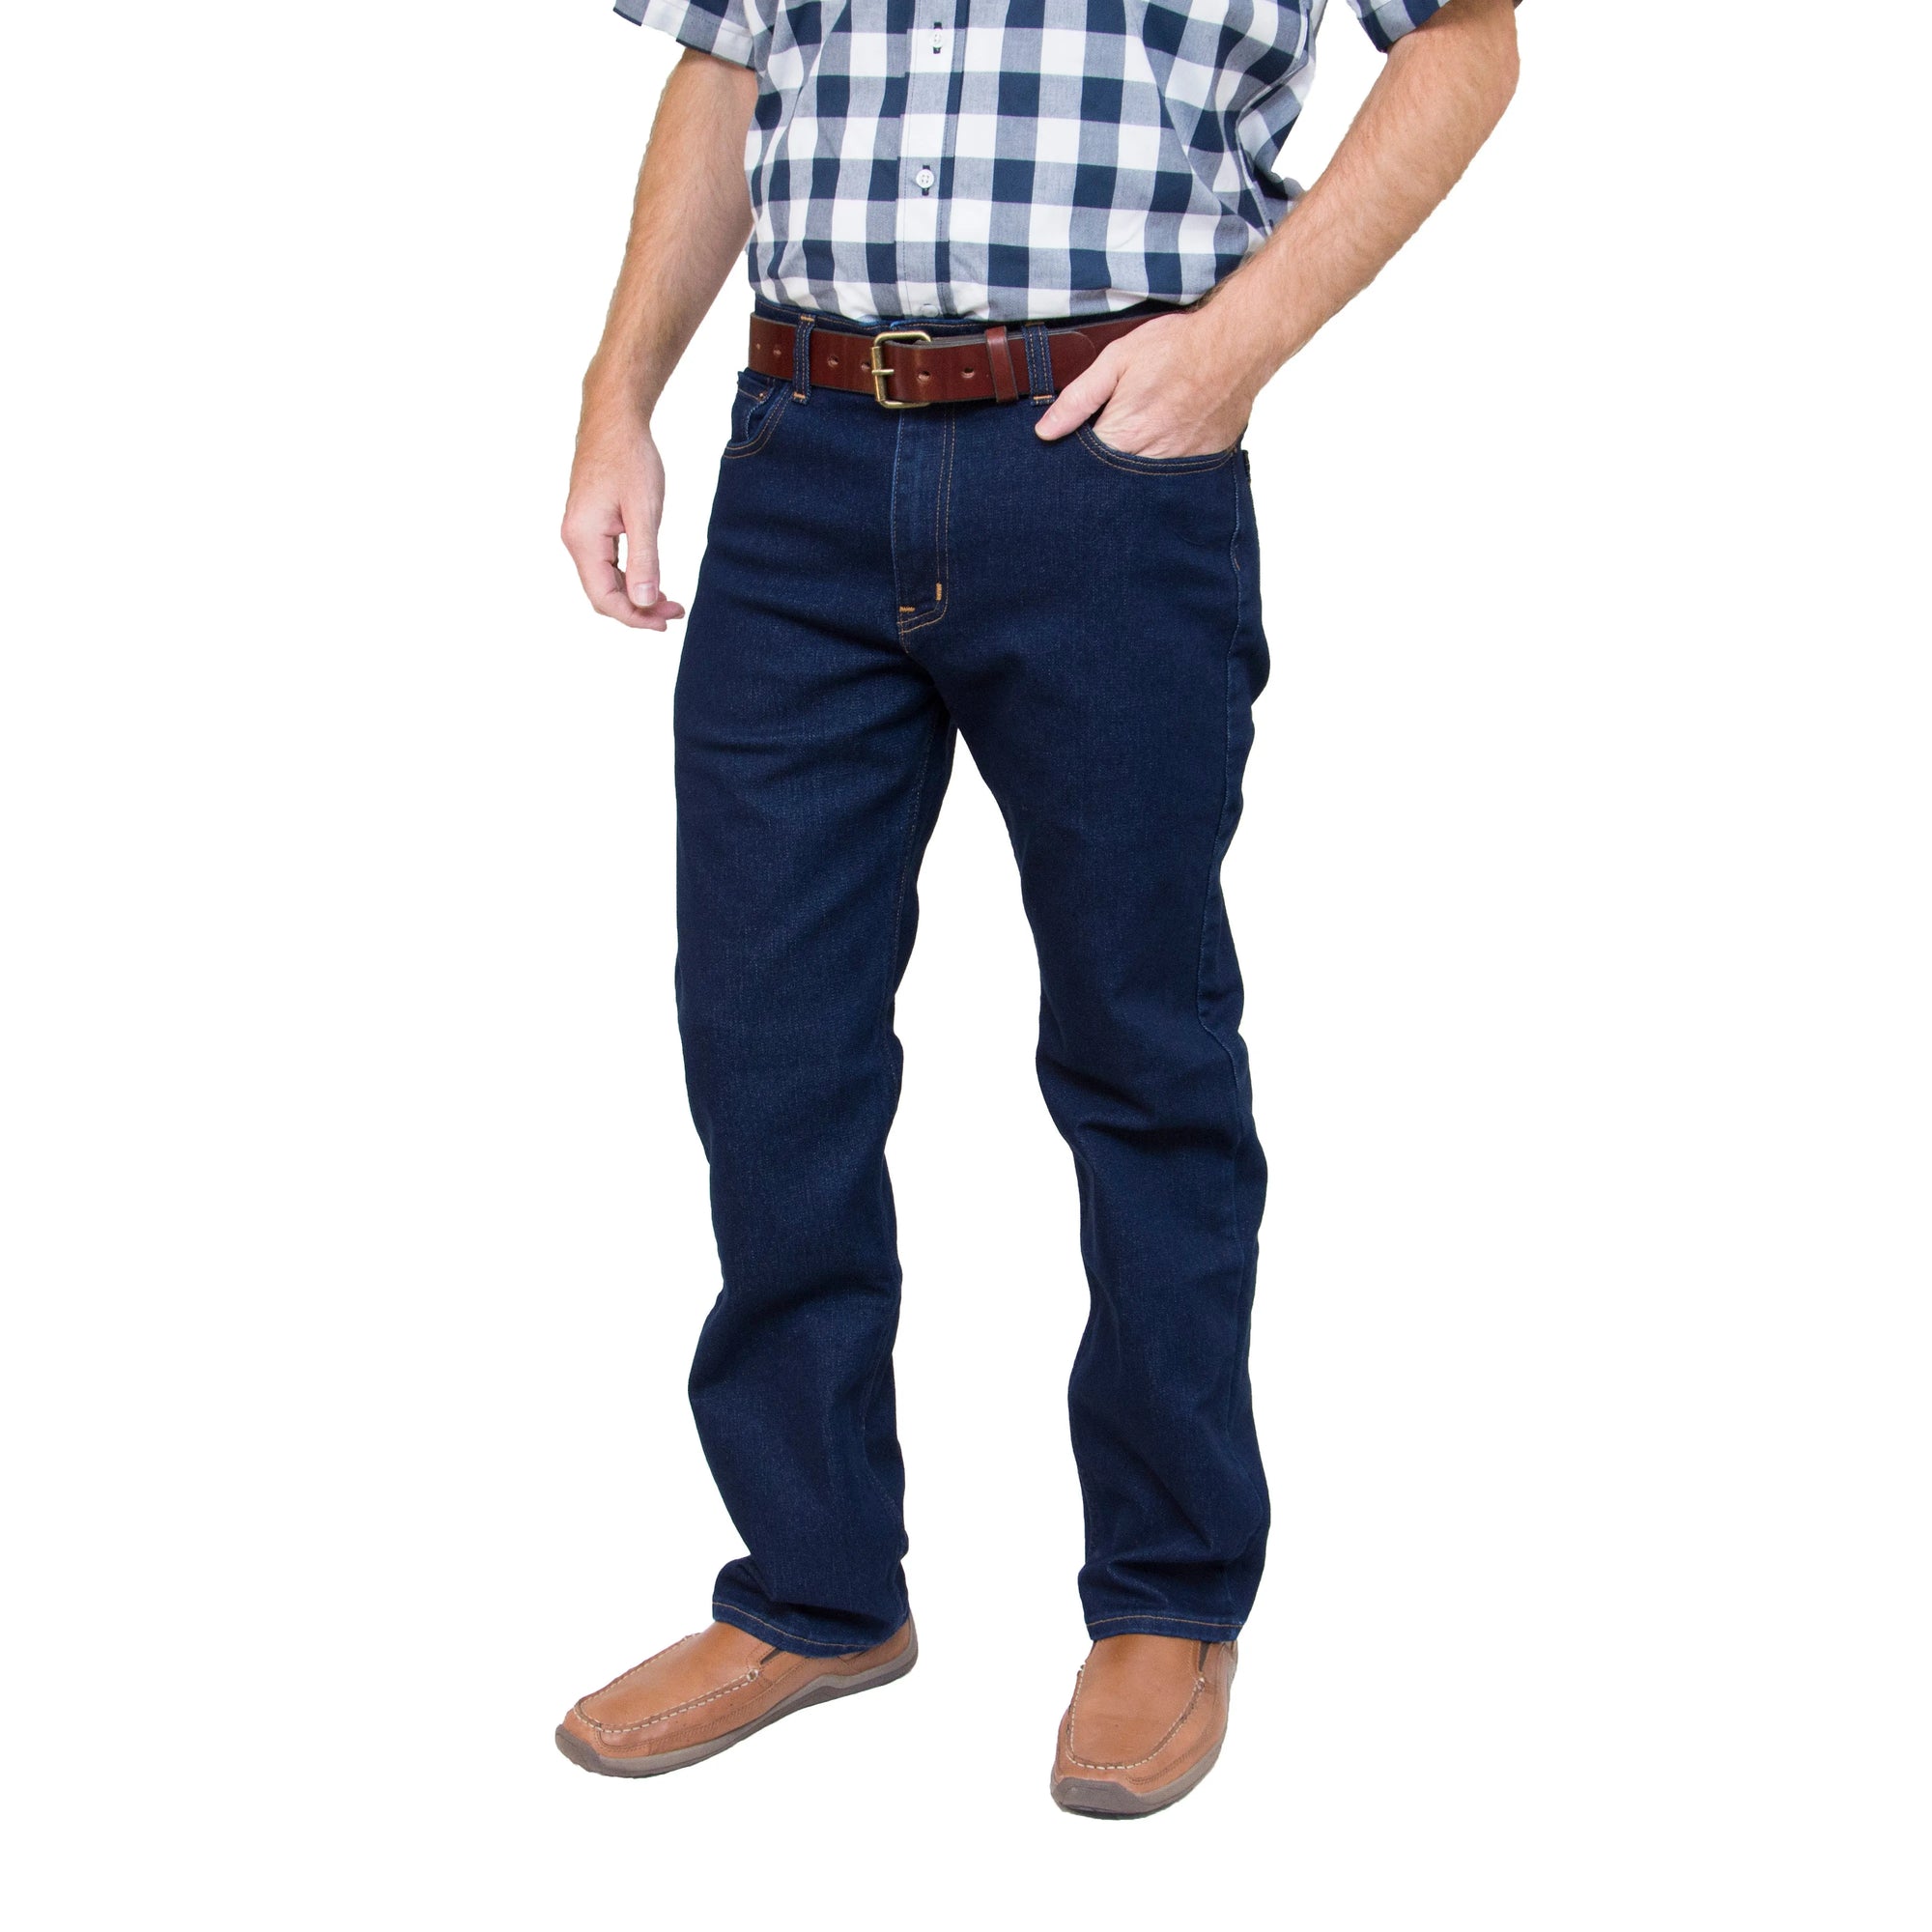 All American Men's 1776 Stretch Jean - All American Clothing Co